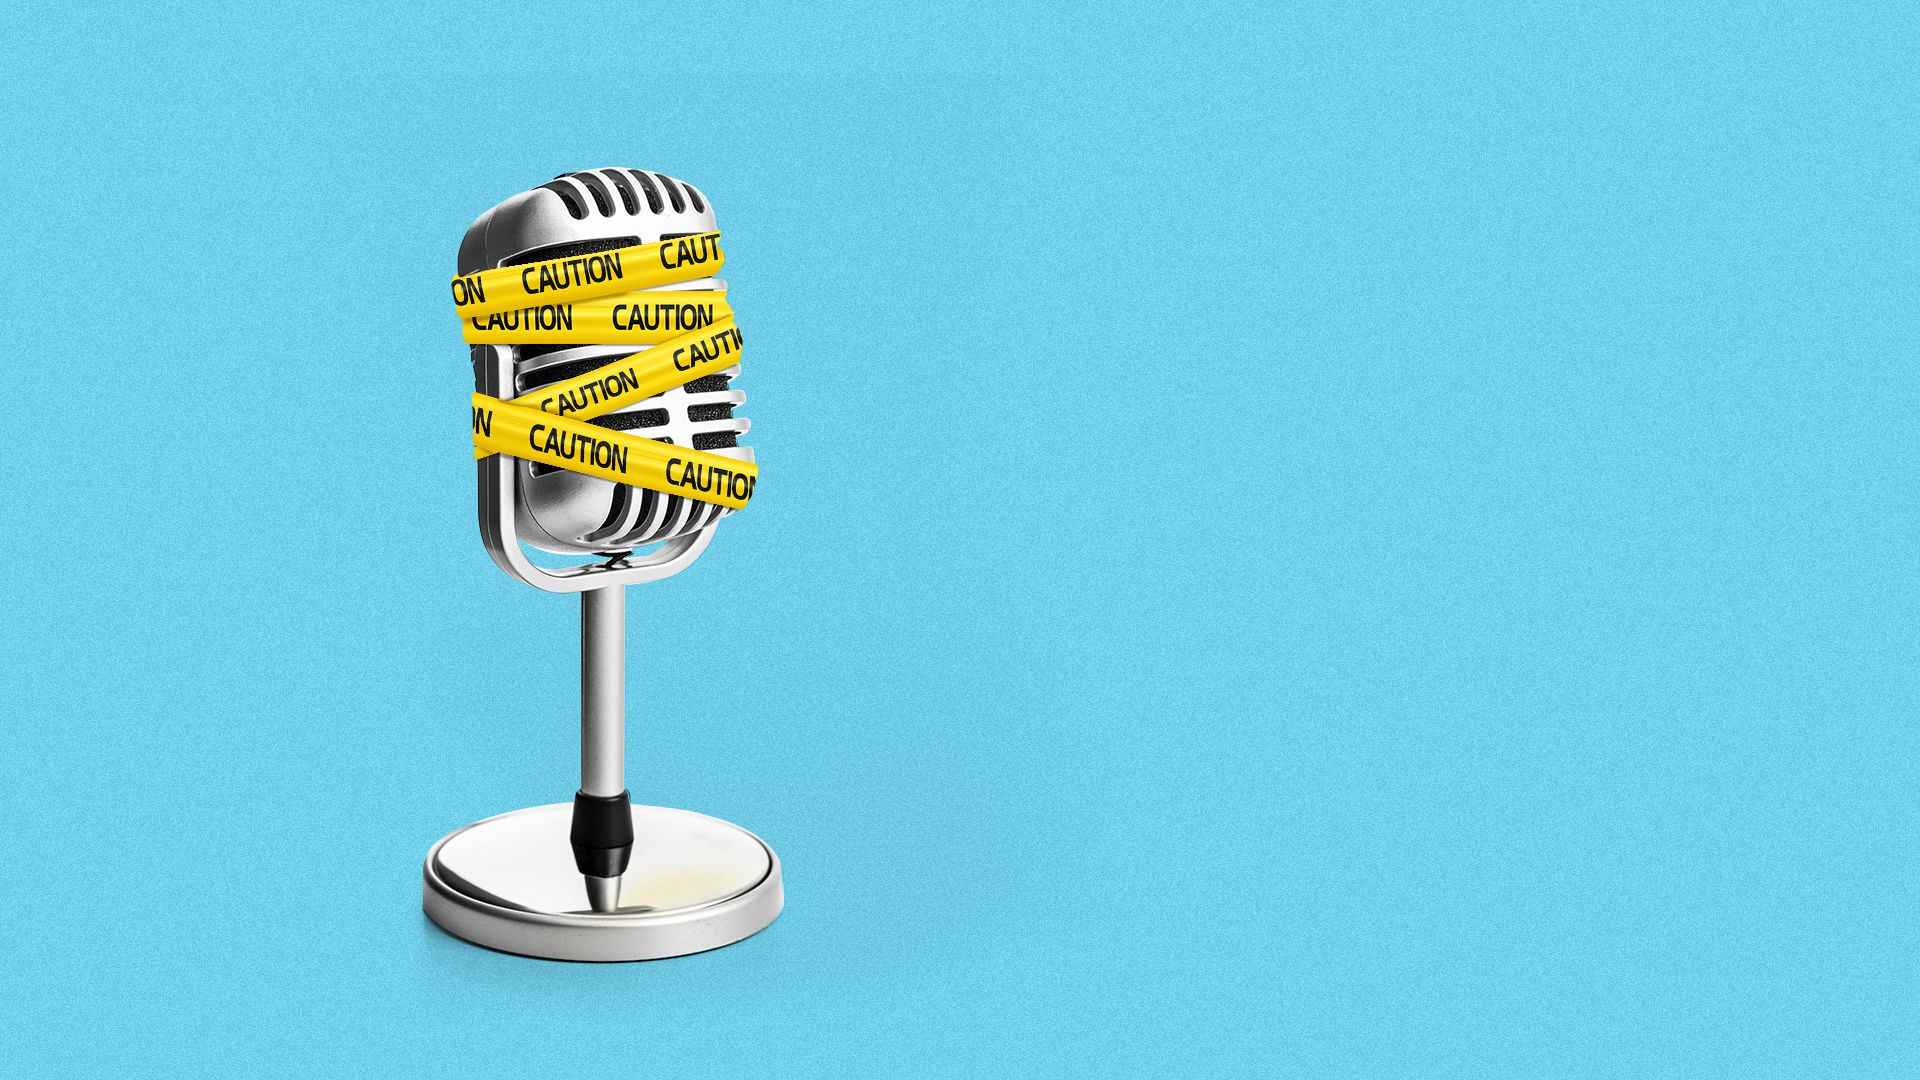 Illustration of a retro microphone with caution tape over it